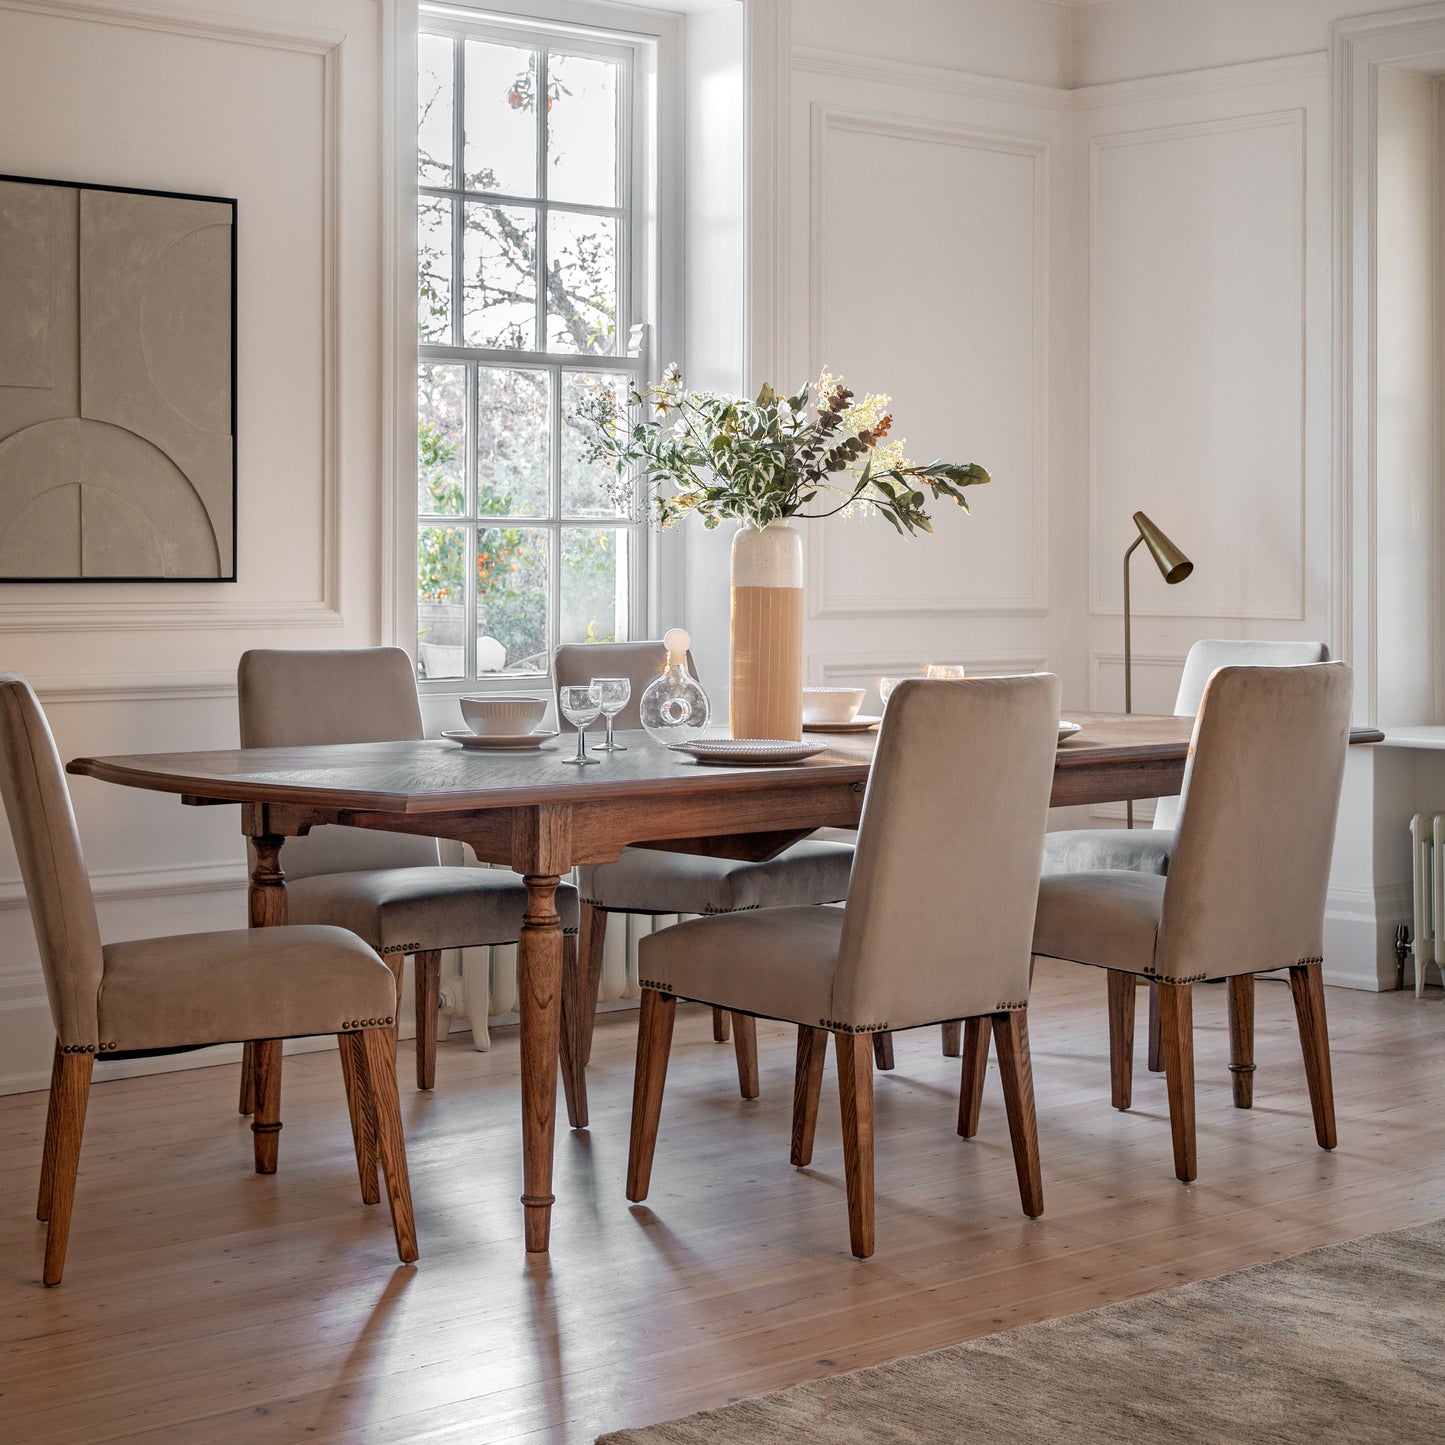 A dining room furnished with stylish home furniture from Kikiathome.co.uk, including the Sweaton Extending Dining Table and chairs.